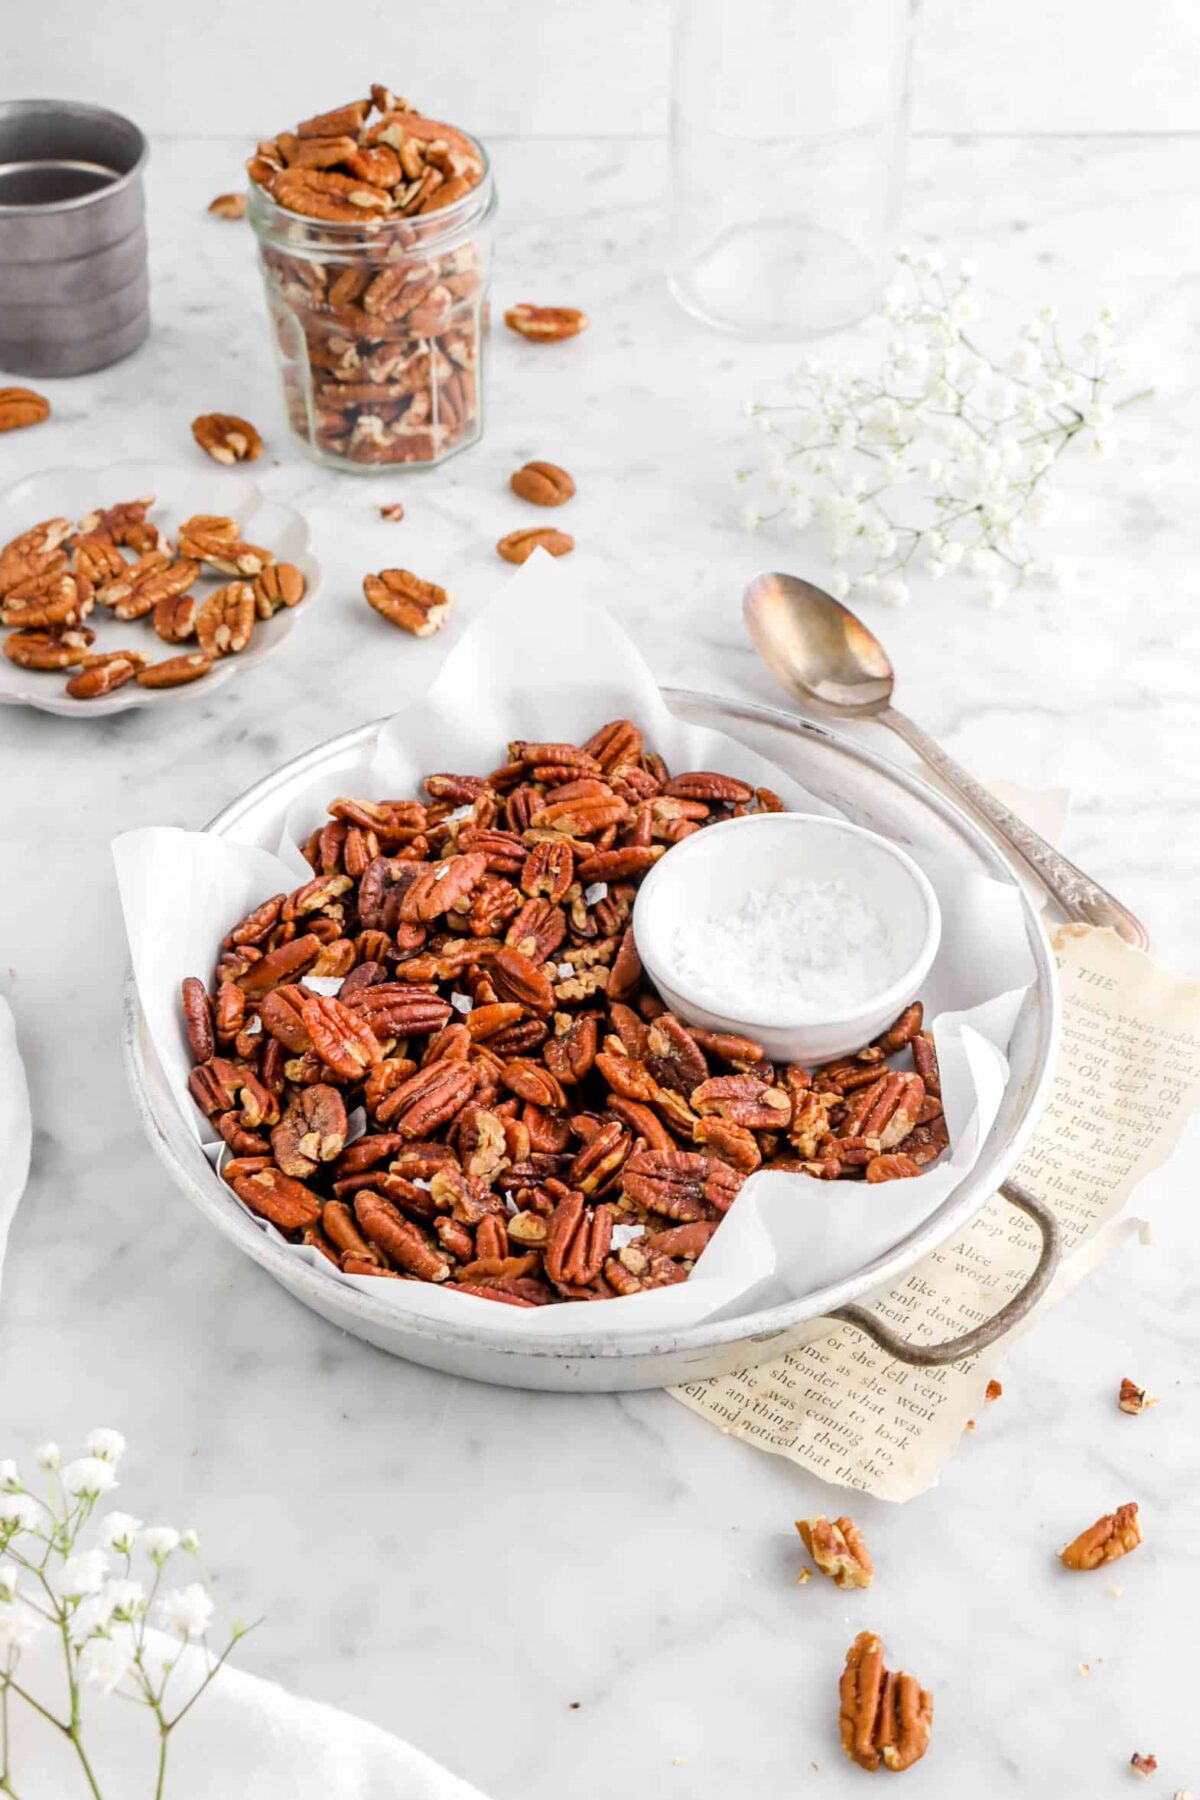 side shot of roasted pecans in old cake pan with flaked salt on top, bowl of salt, a spoon, more pecans around, and flowers